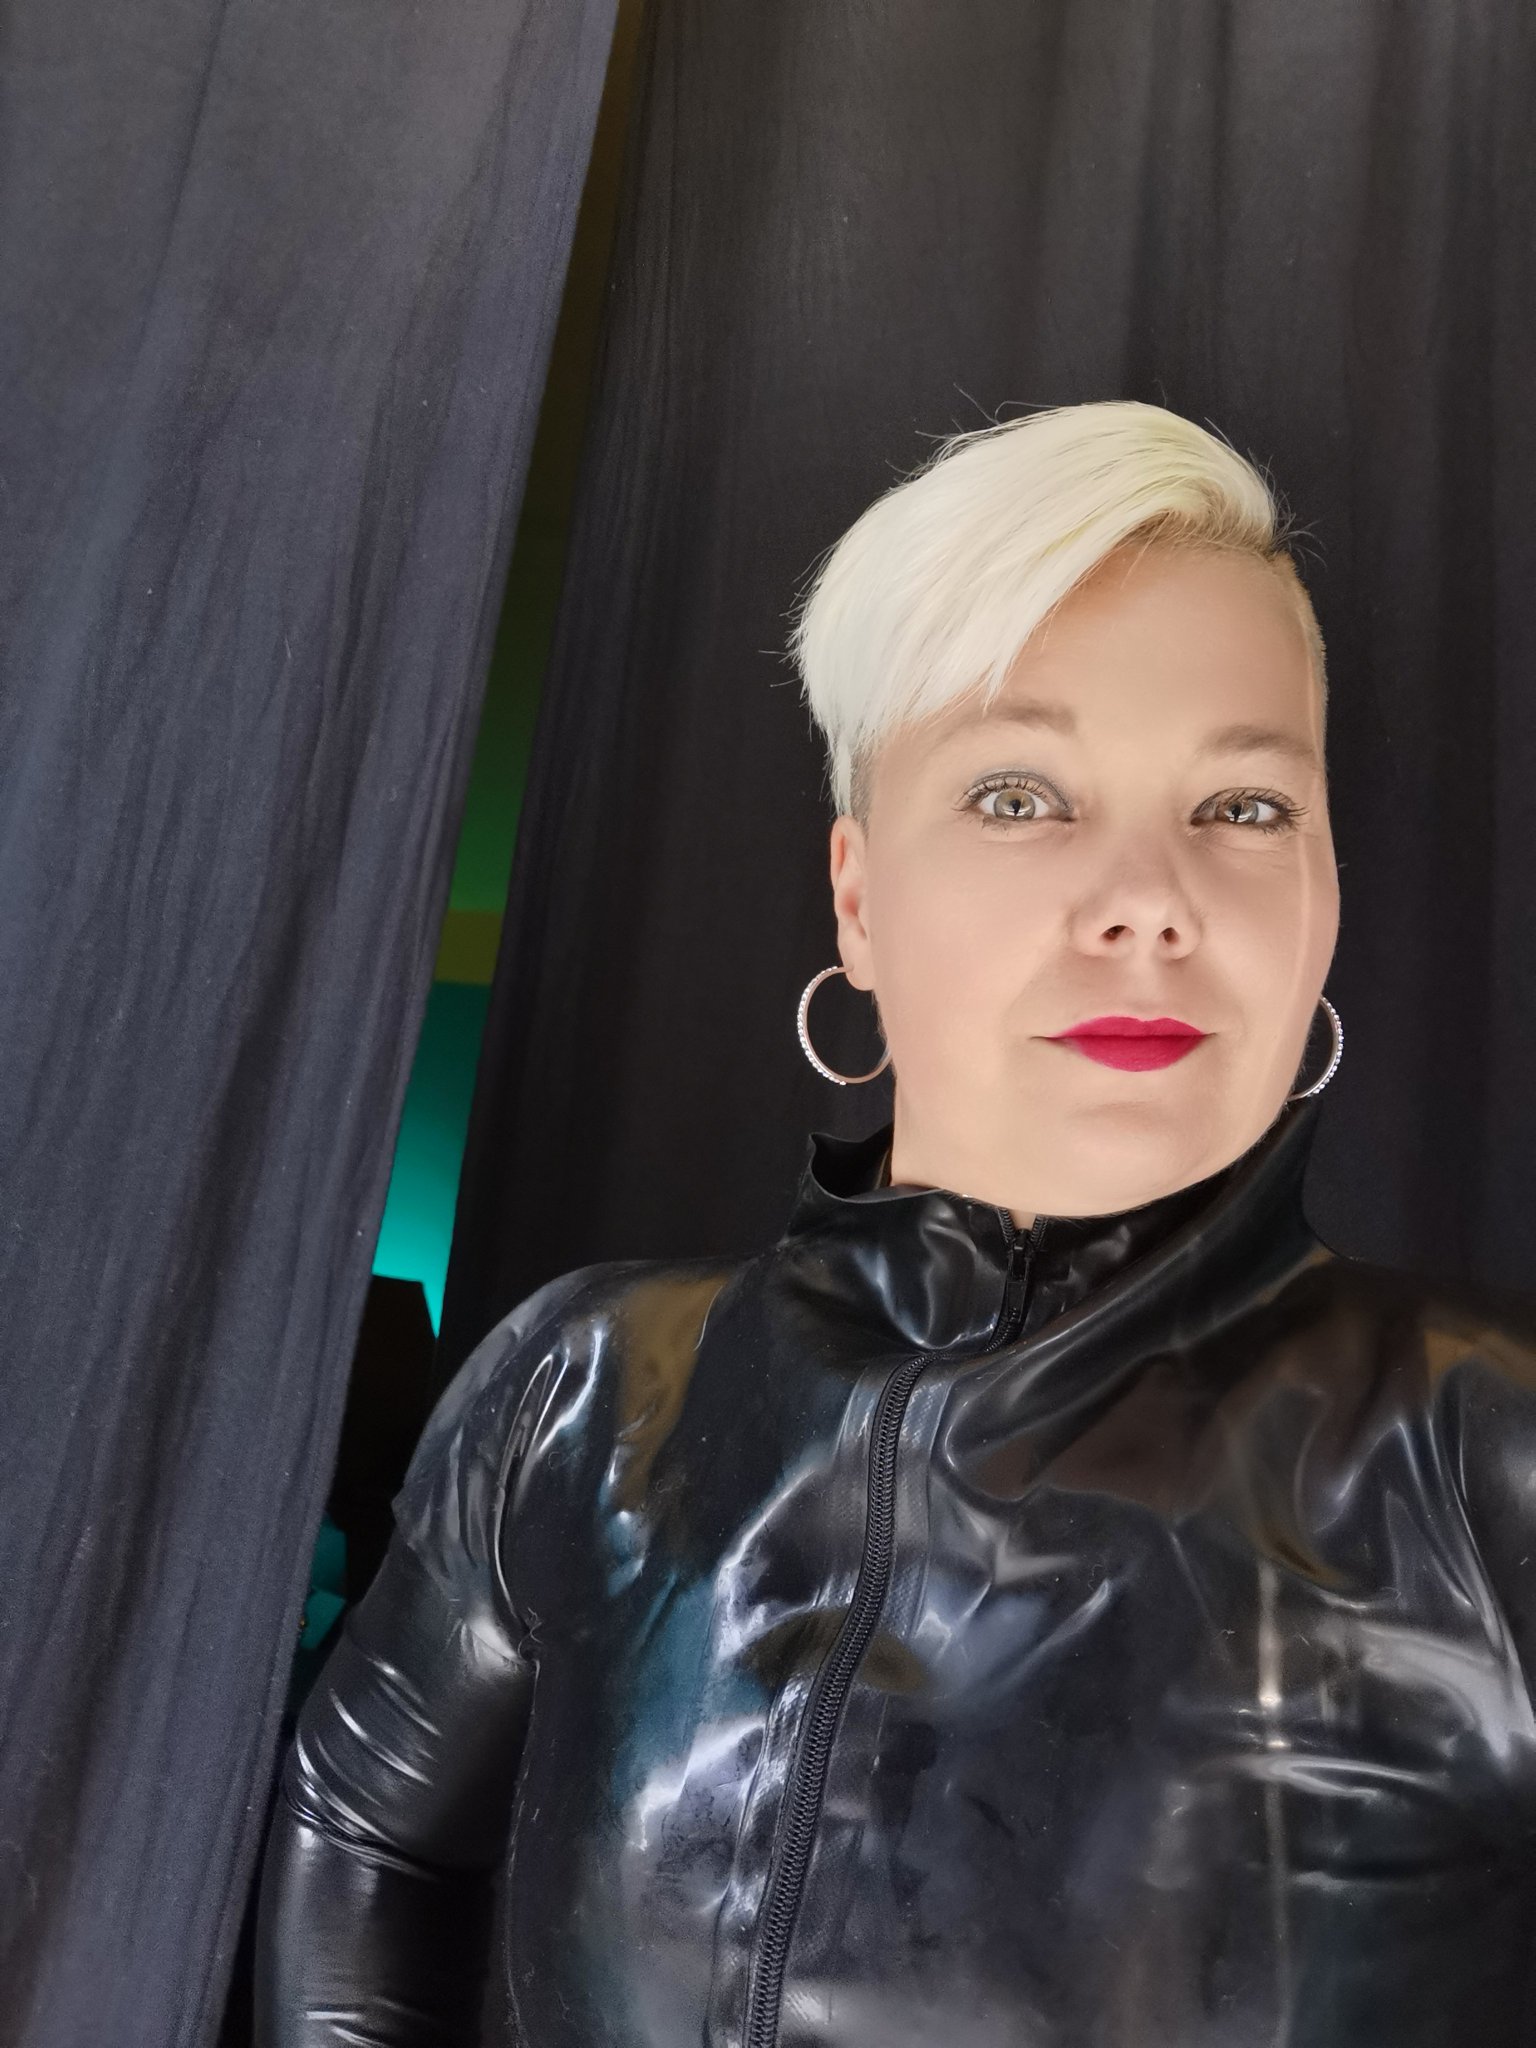 Tw Pornstars Domina Lady Susan Twitter Rubber Wetlook Leather All A Fetishist Needs To See